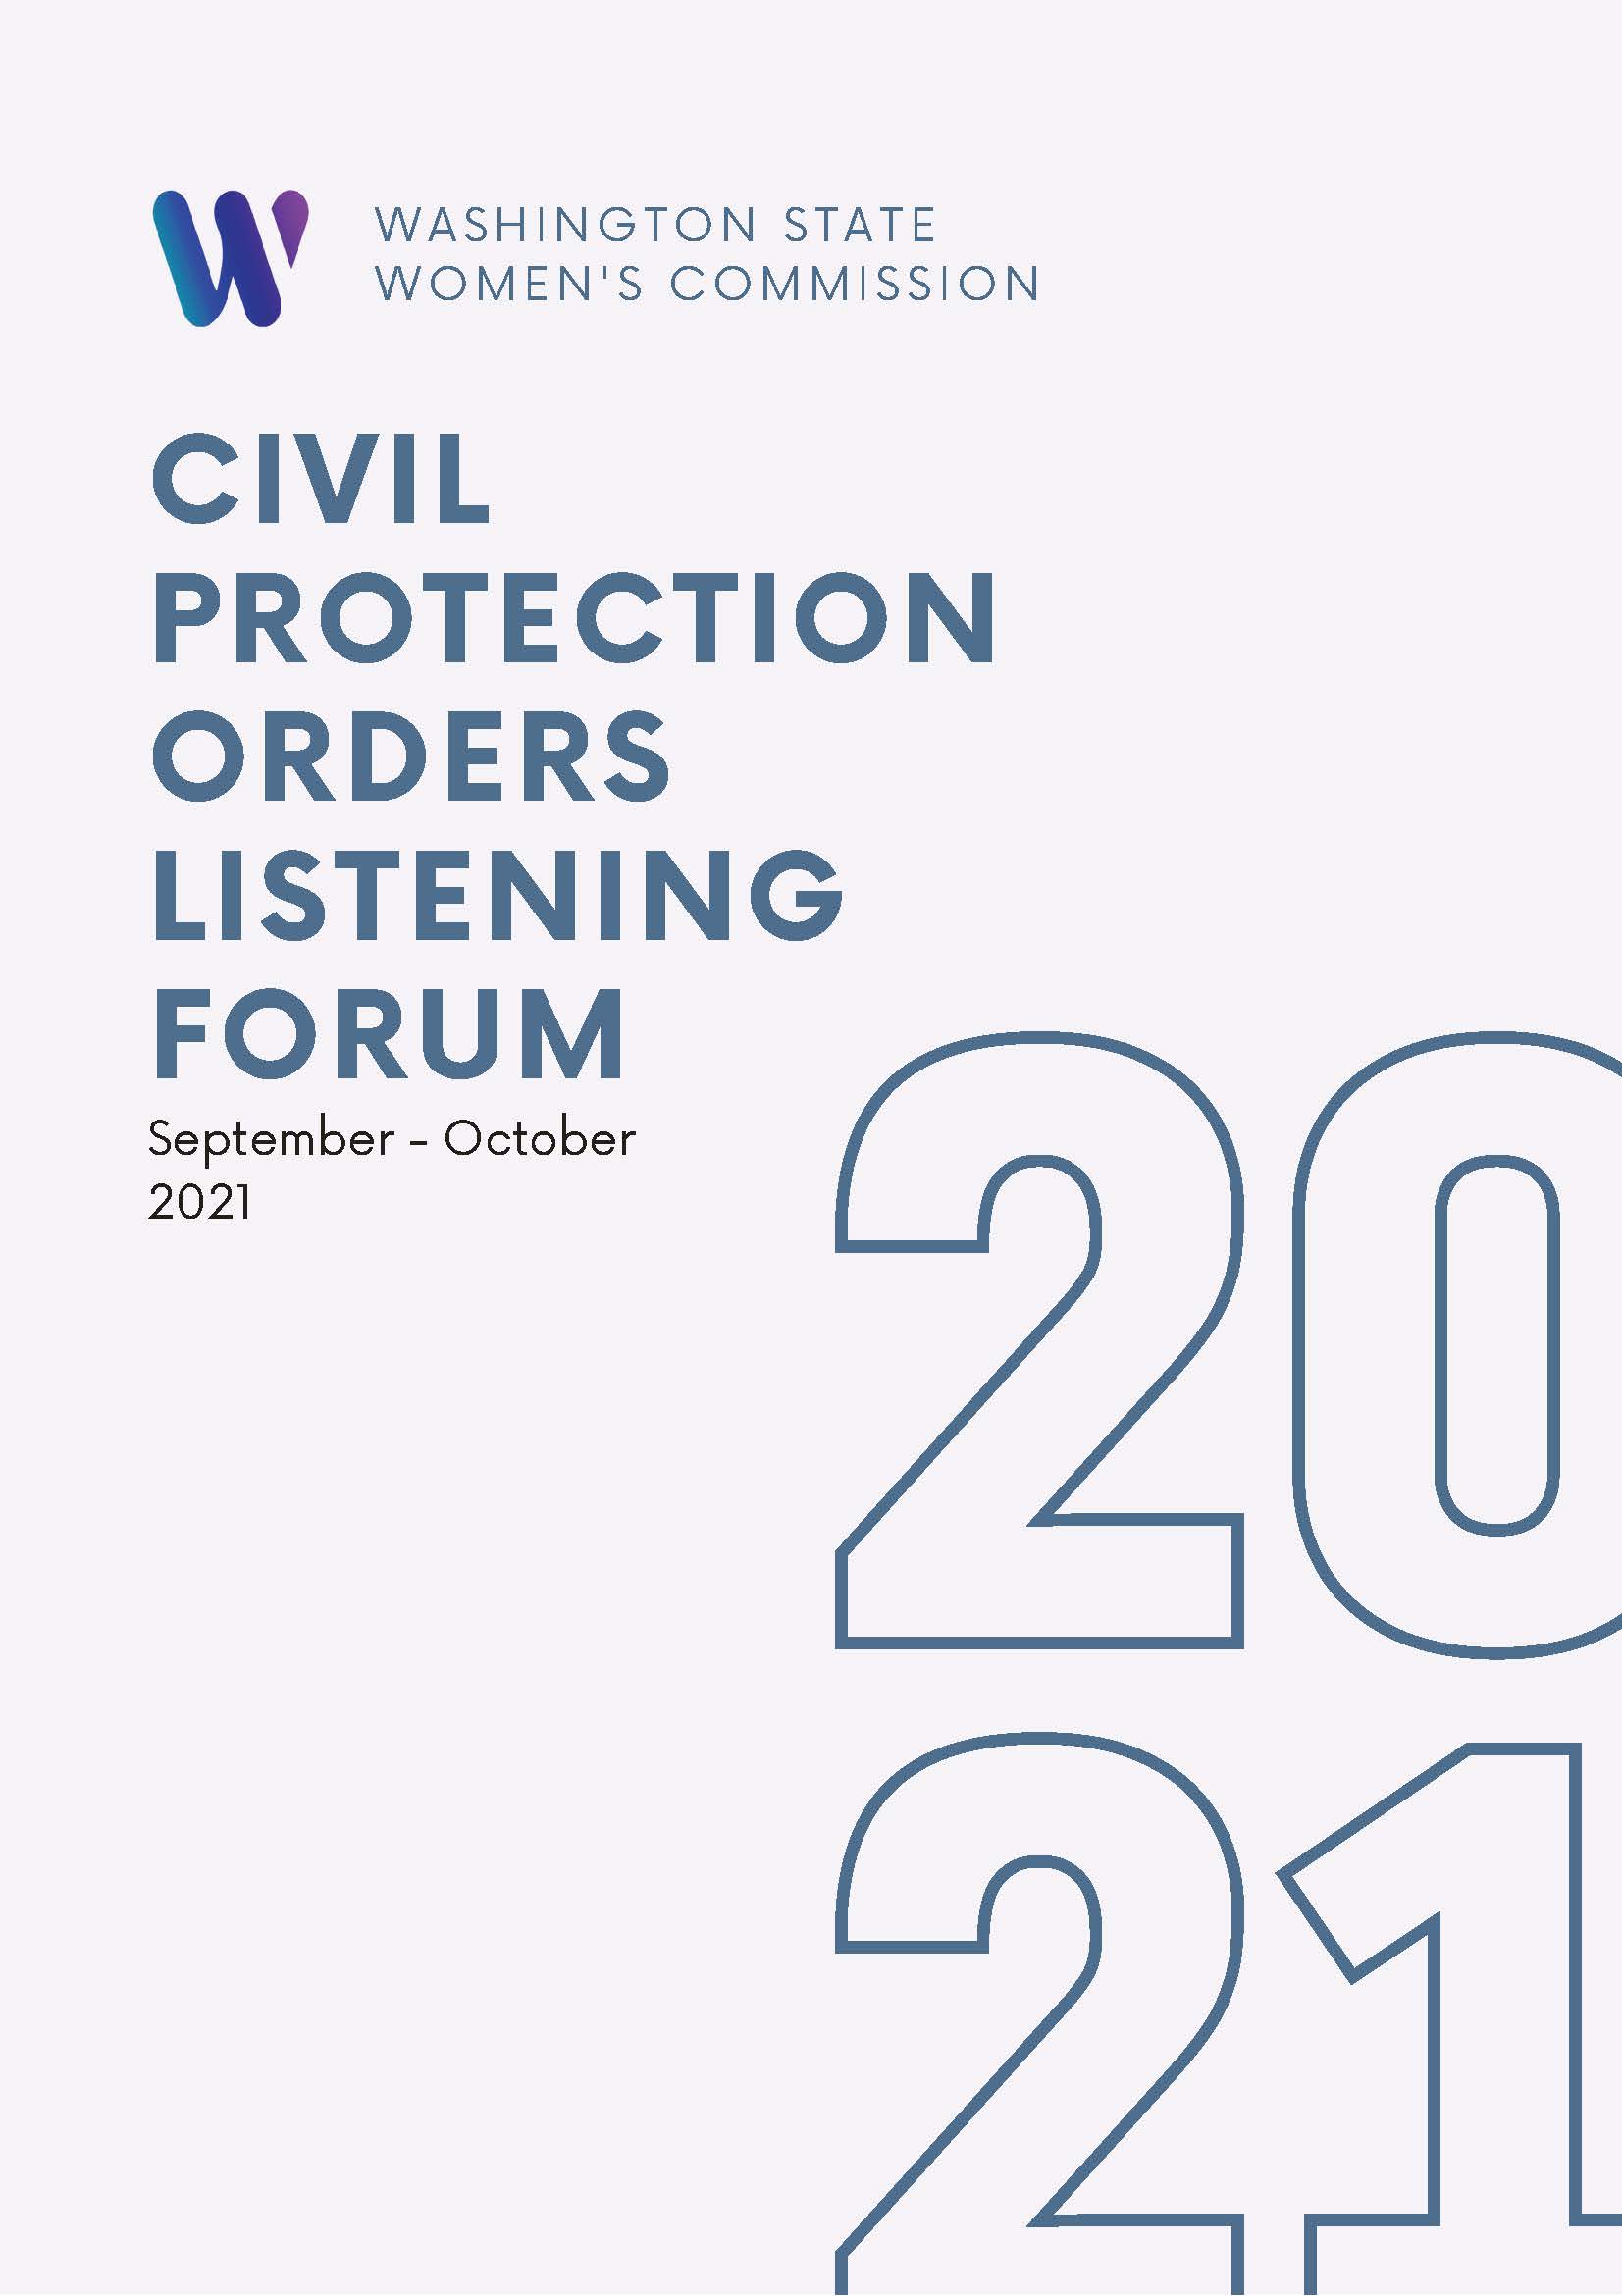 Cover of report, reading "Civil Protection Orders Listening Forum"